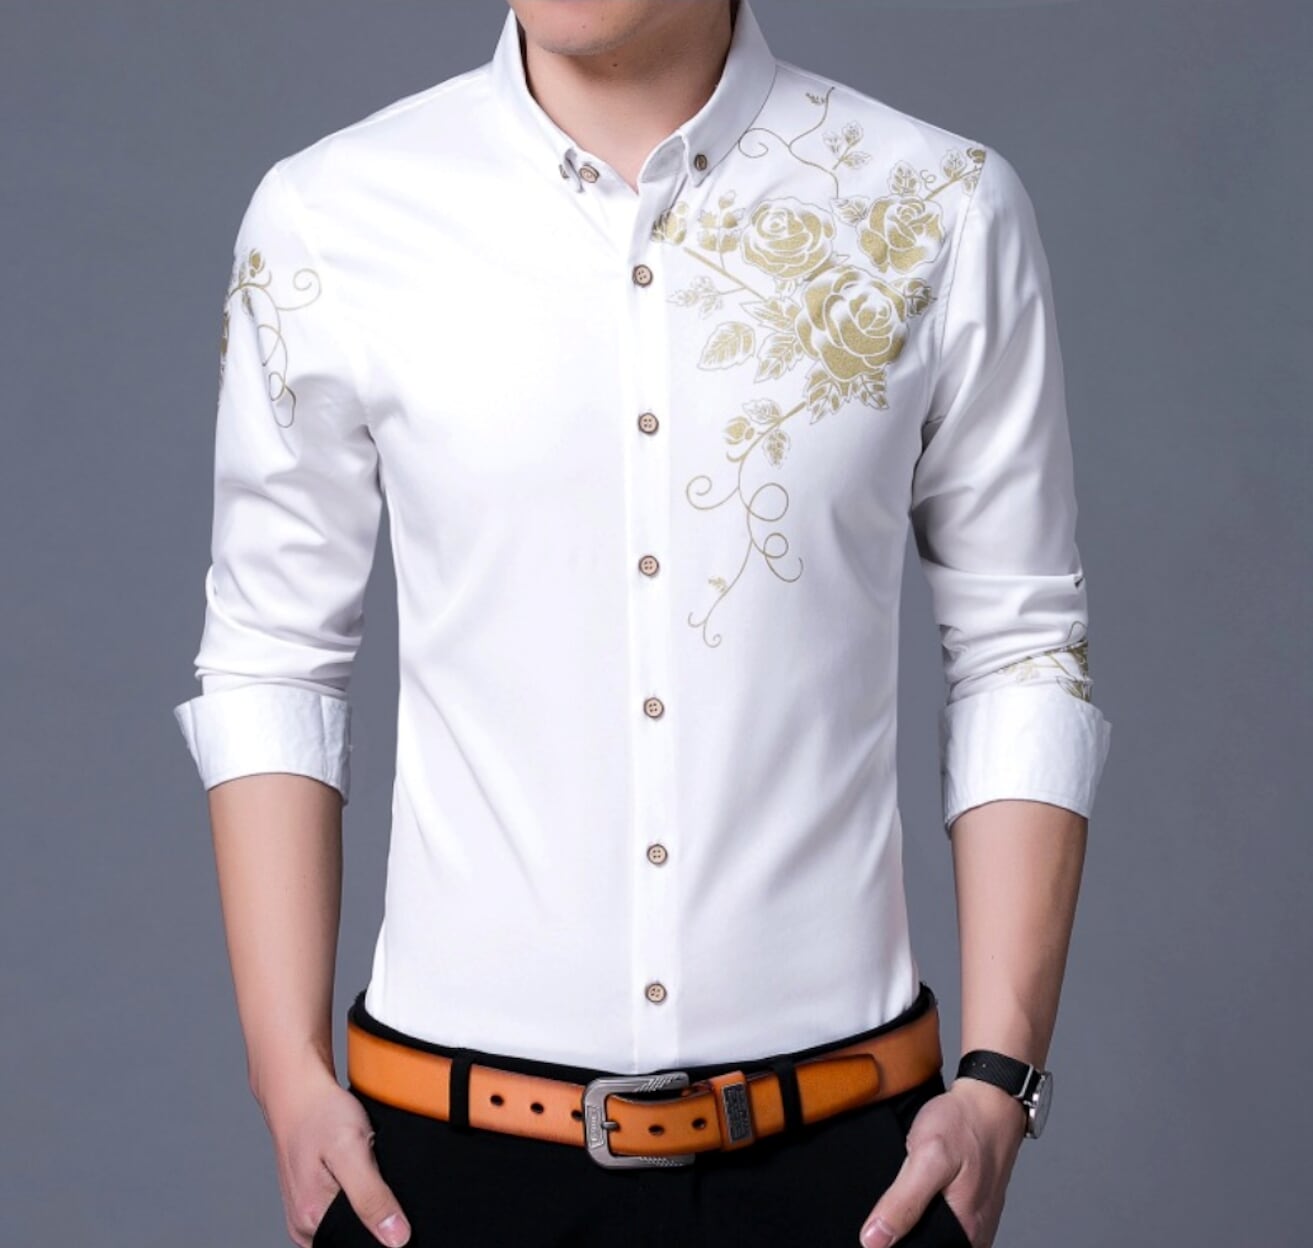 Mens Shirt With Floral Design on Front and Sleeve